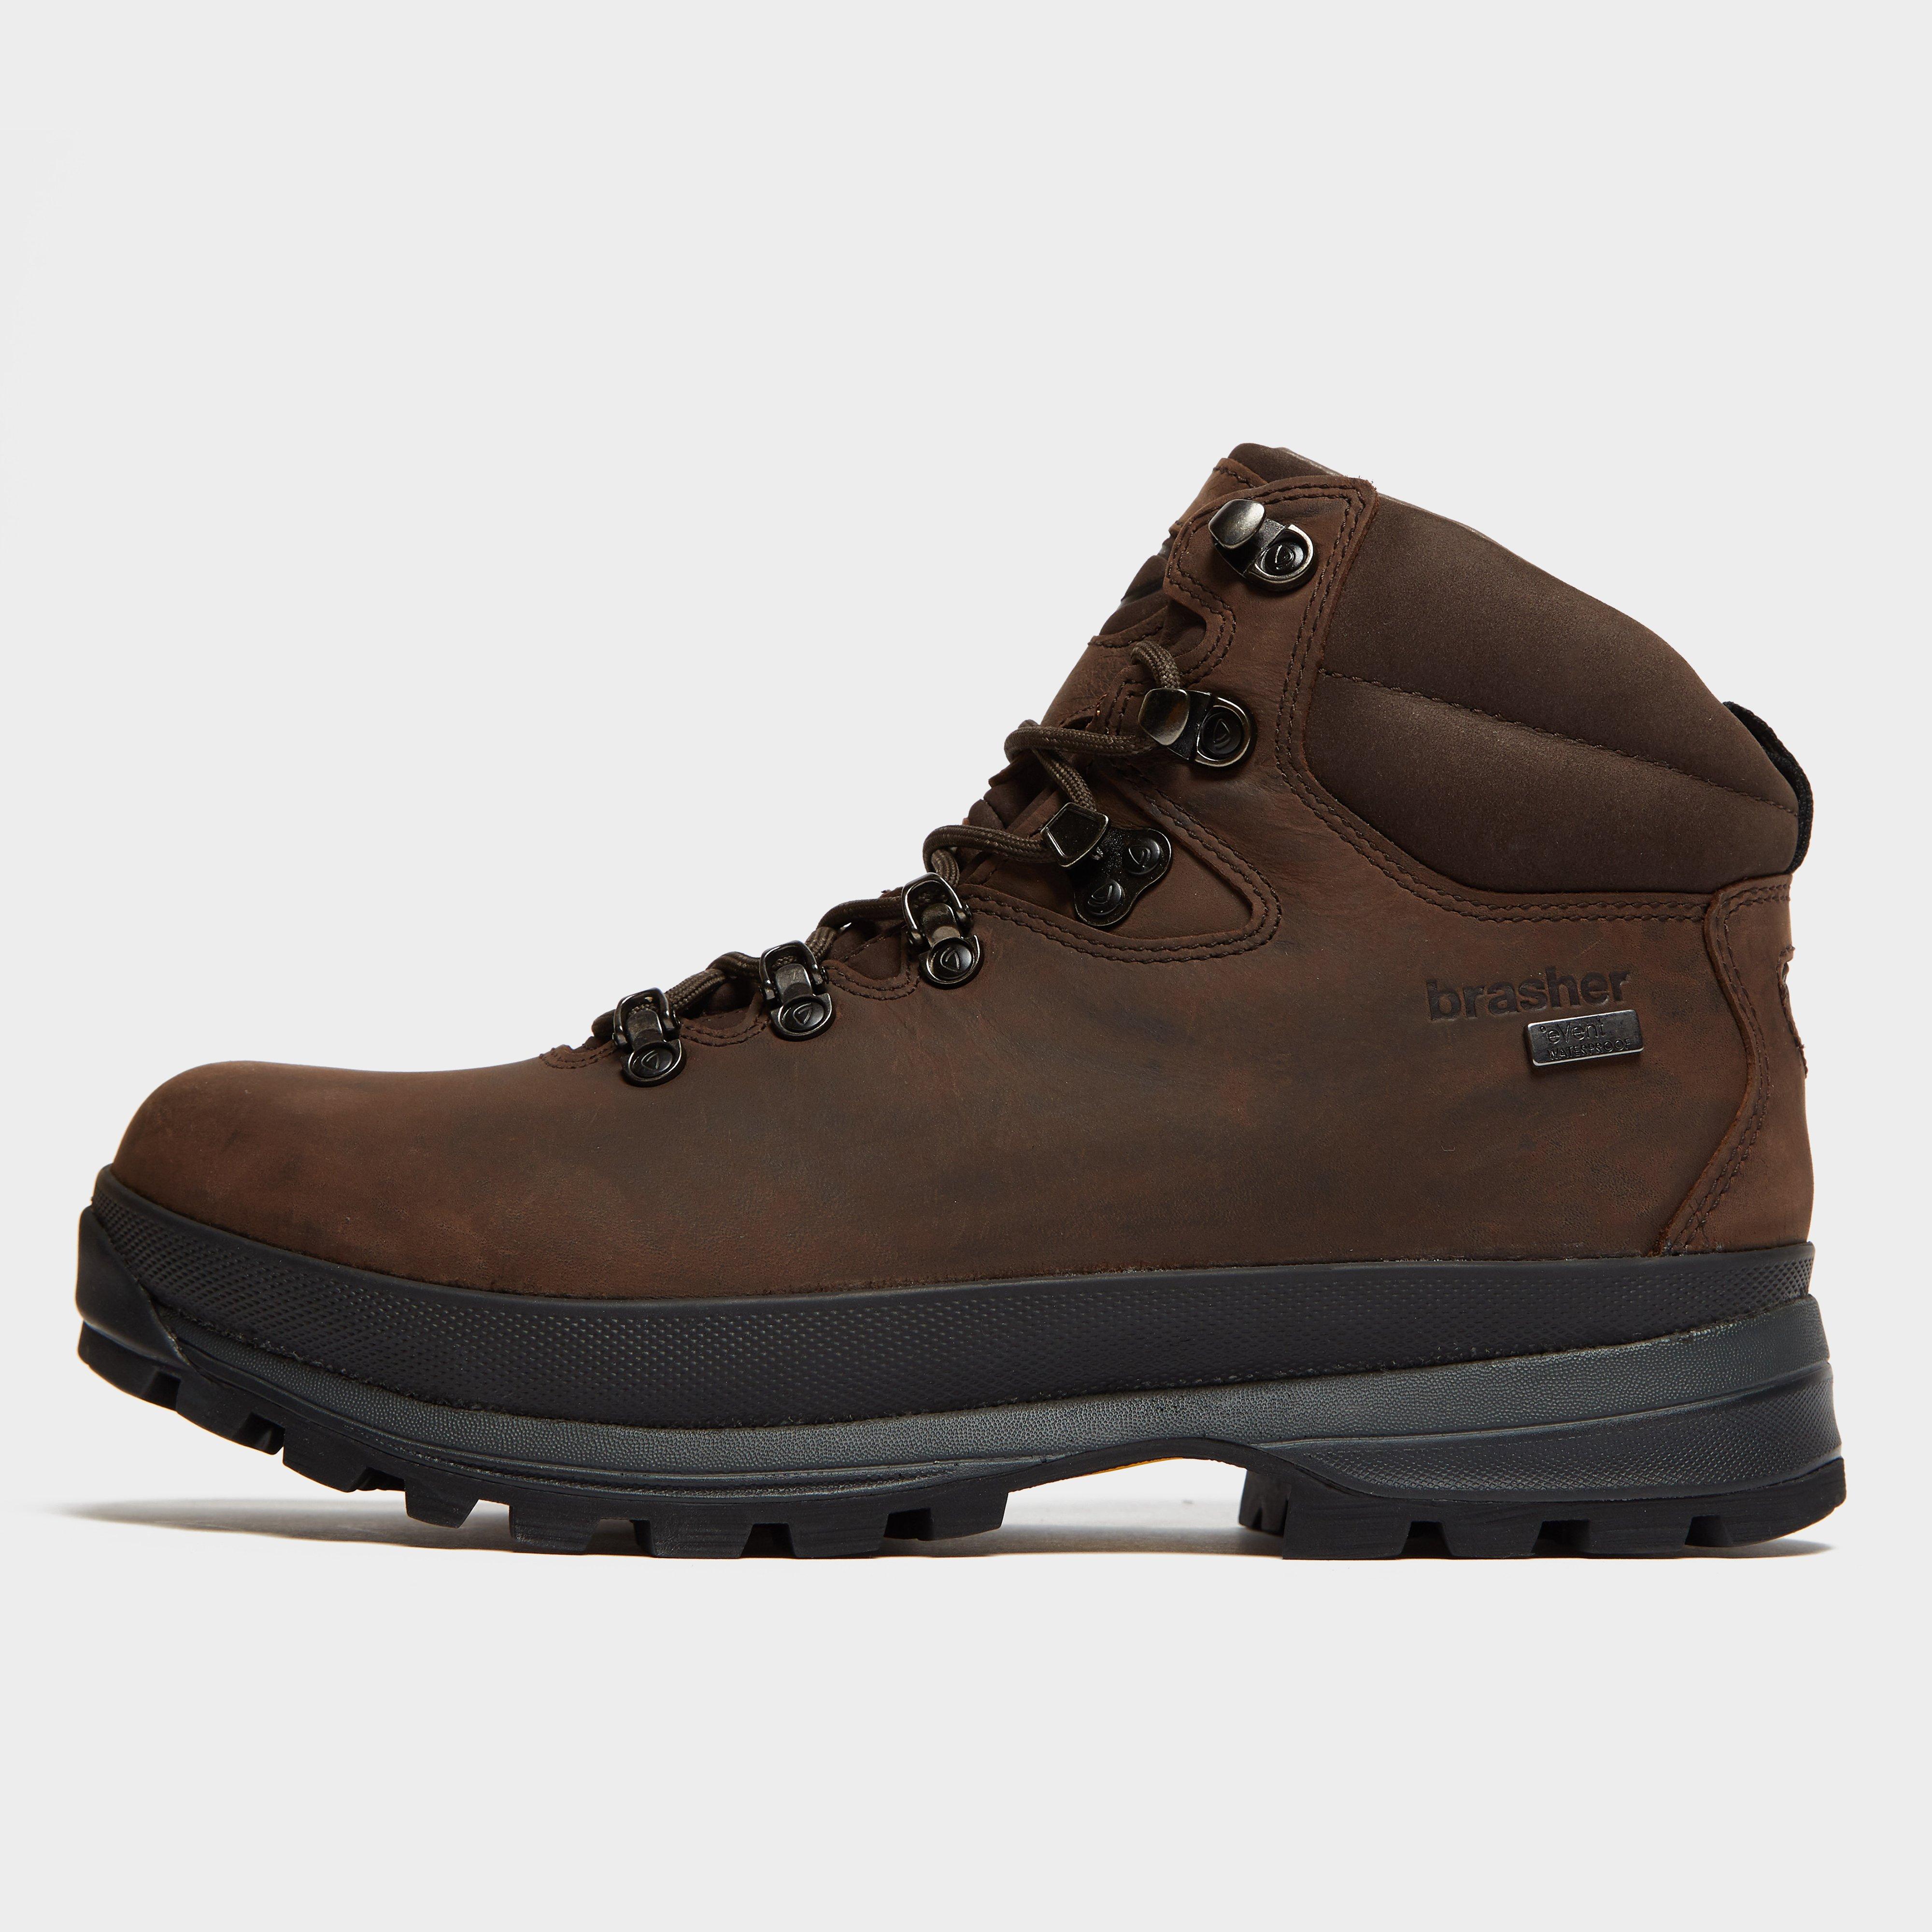 walking boots at go outdoors